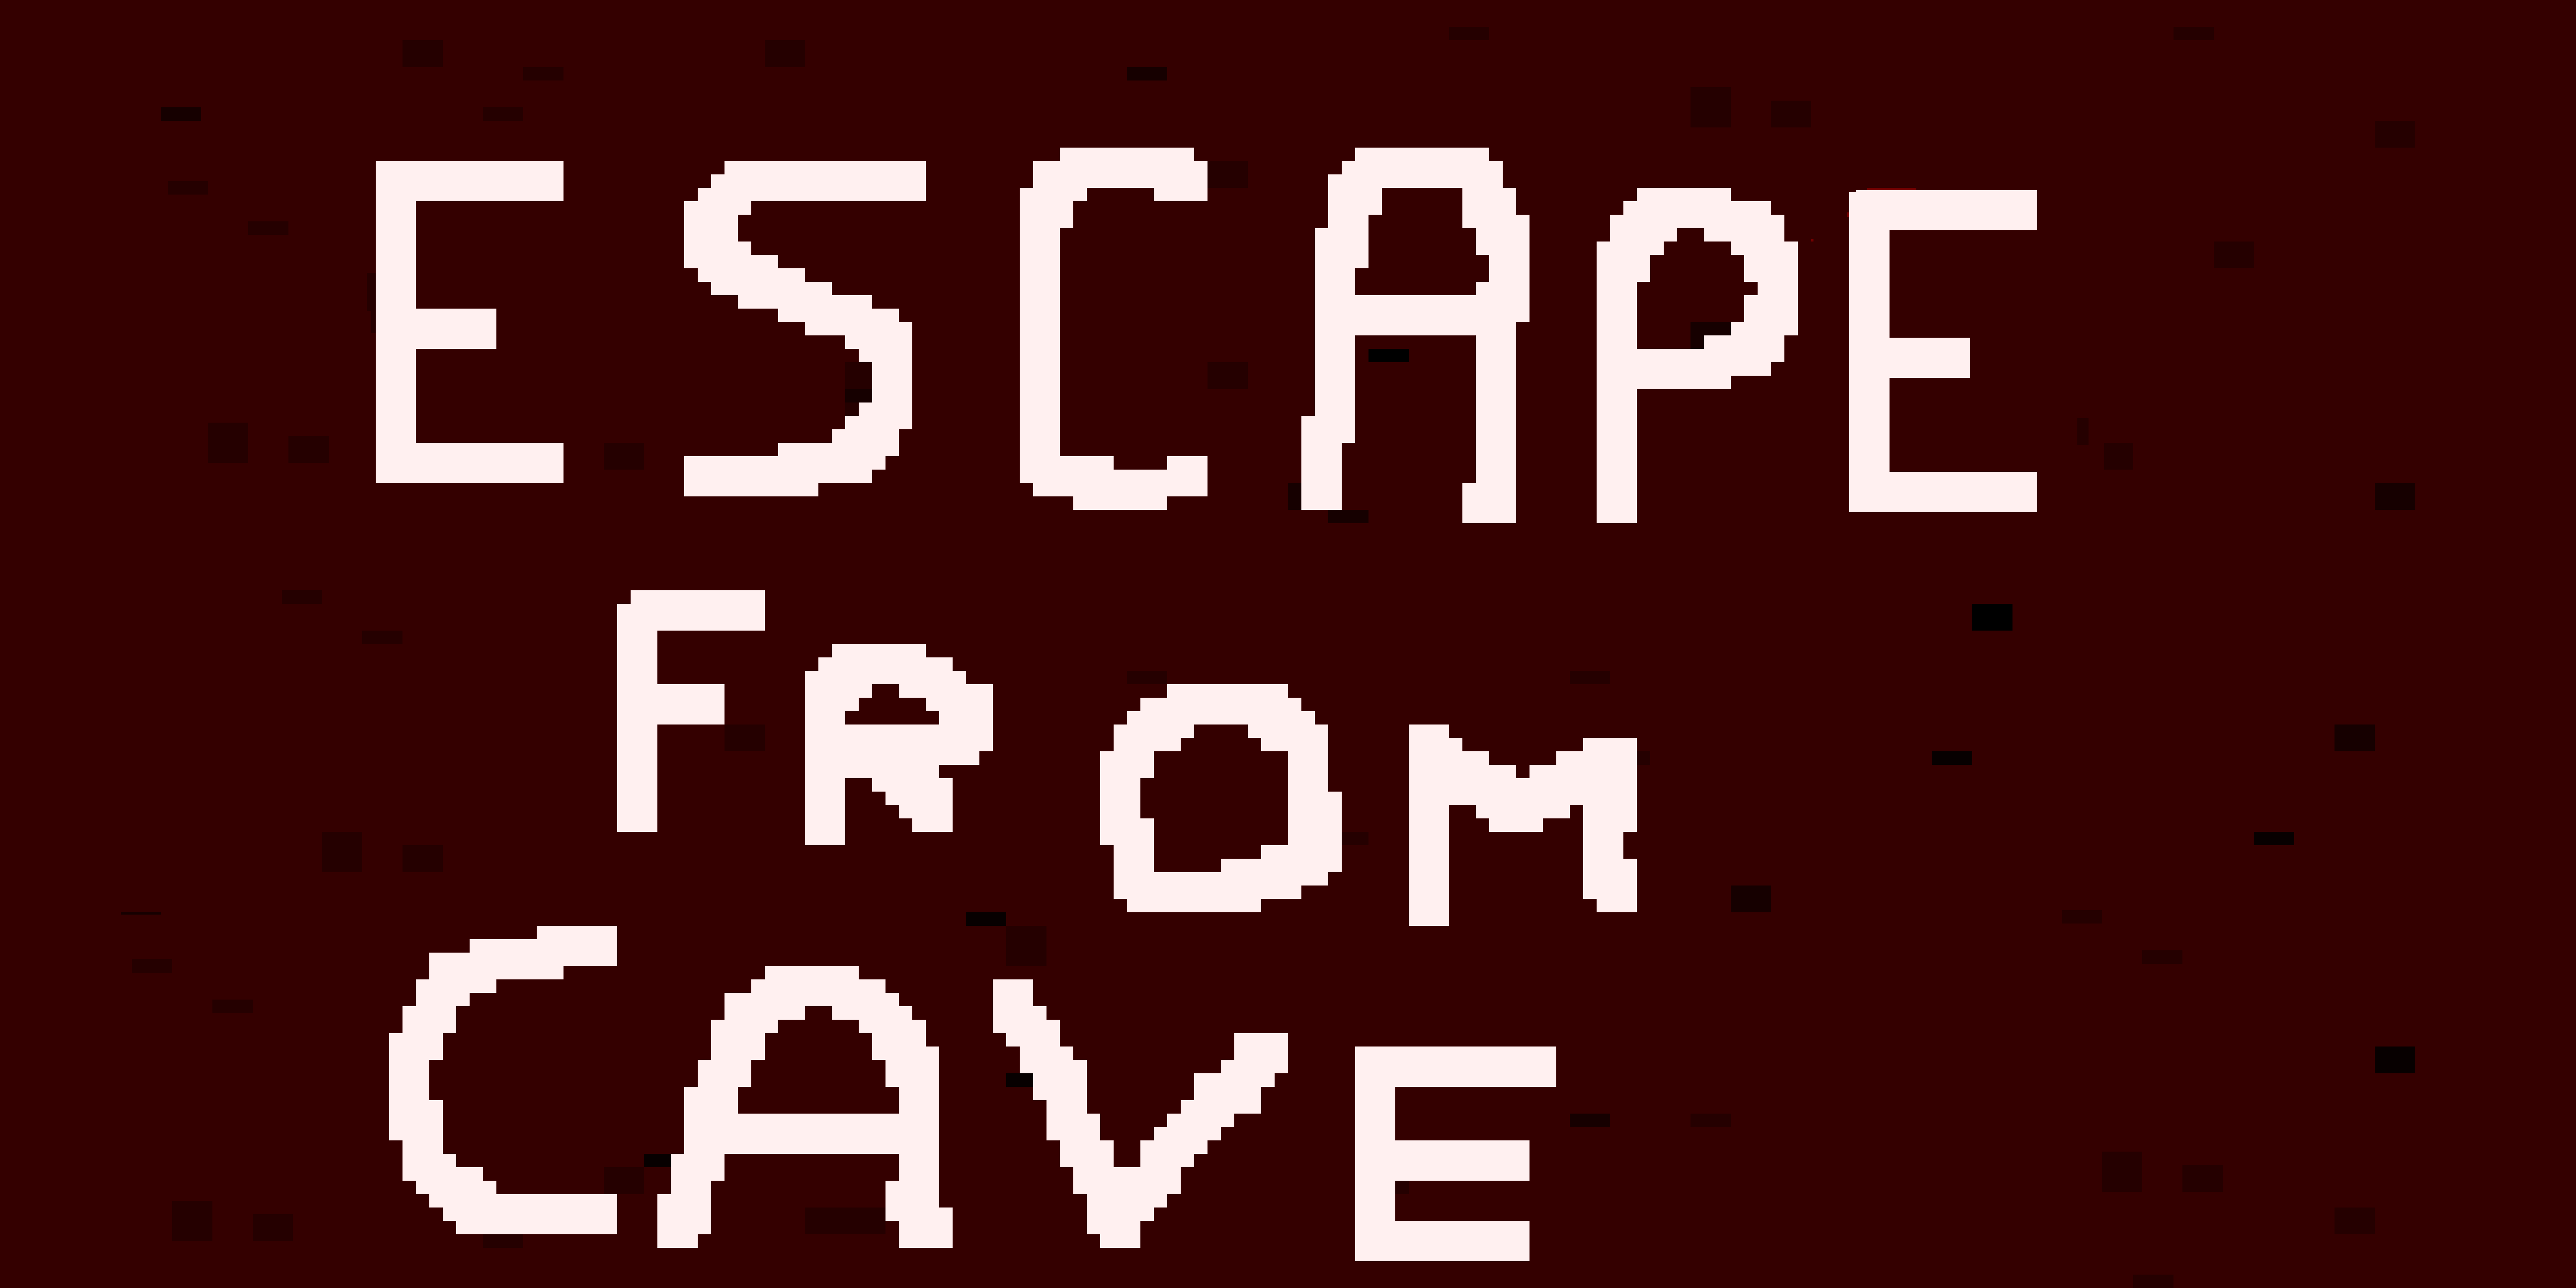 ESCAPE FROM CAVE